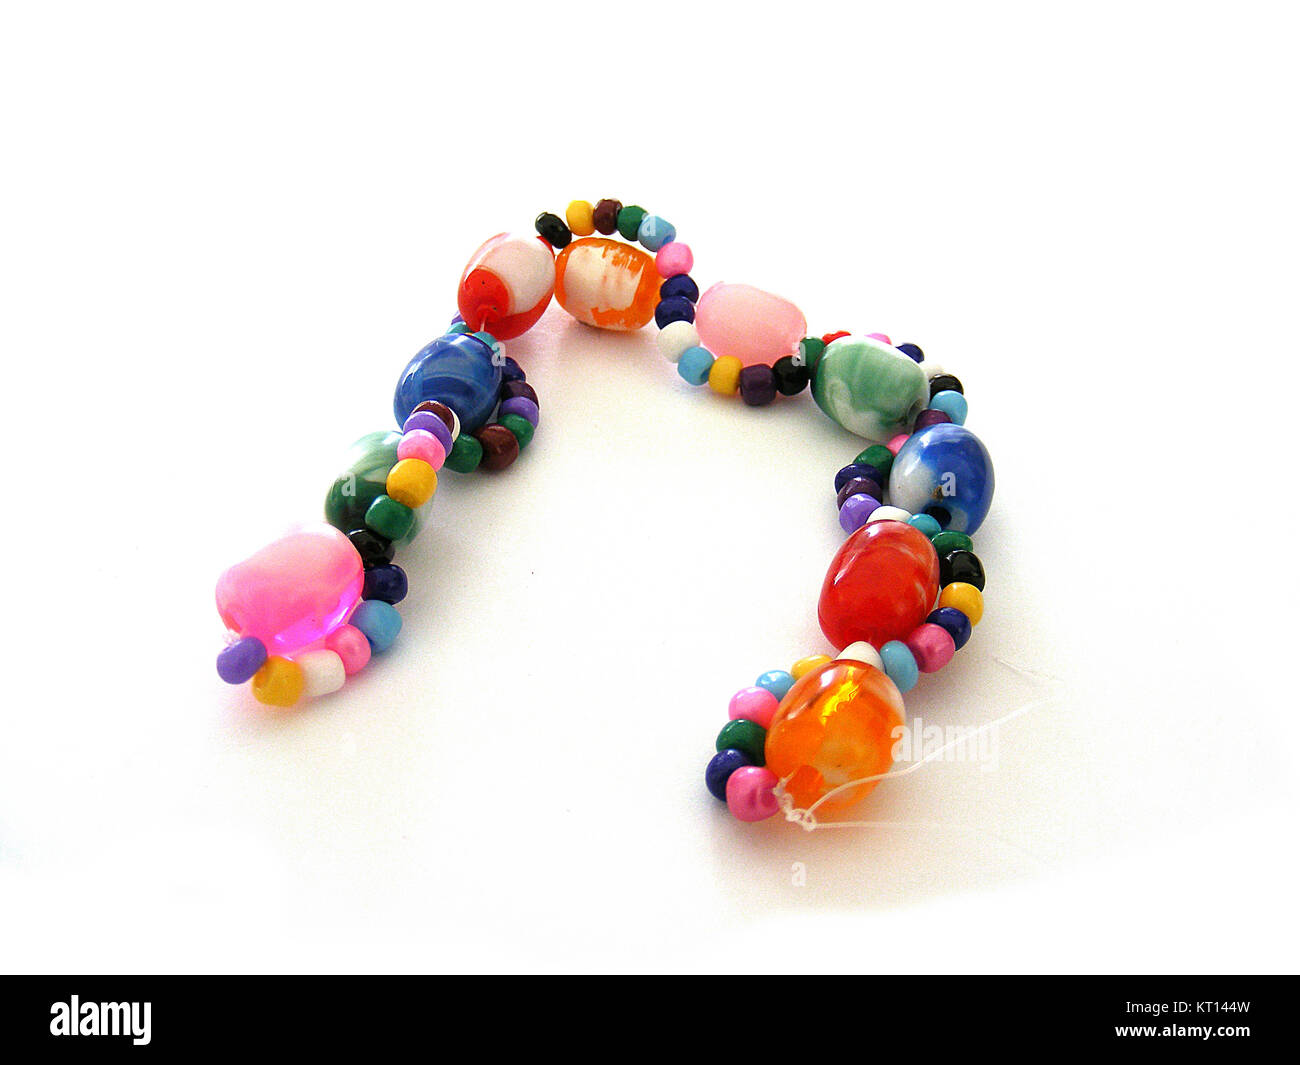 Bracelets from colorful beads Stock Photo